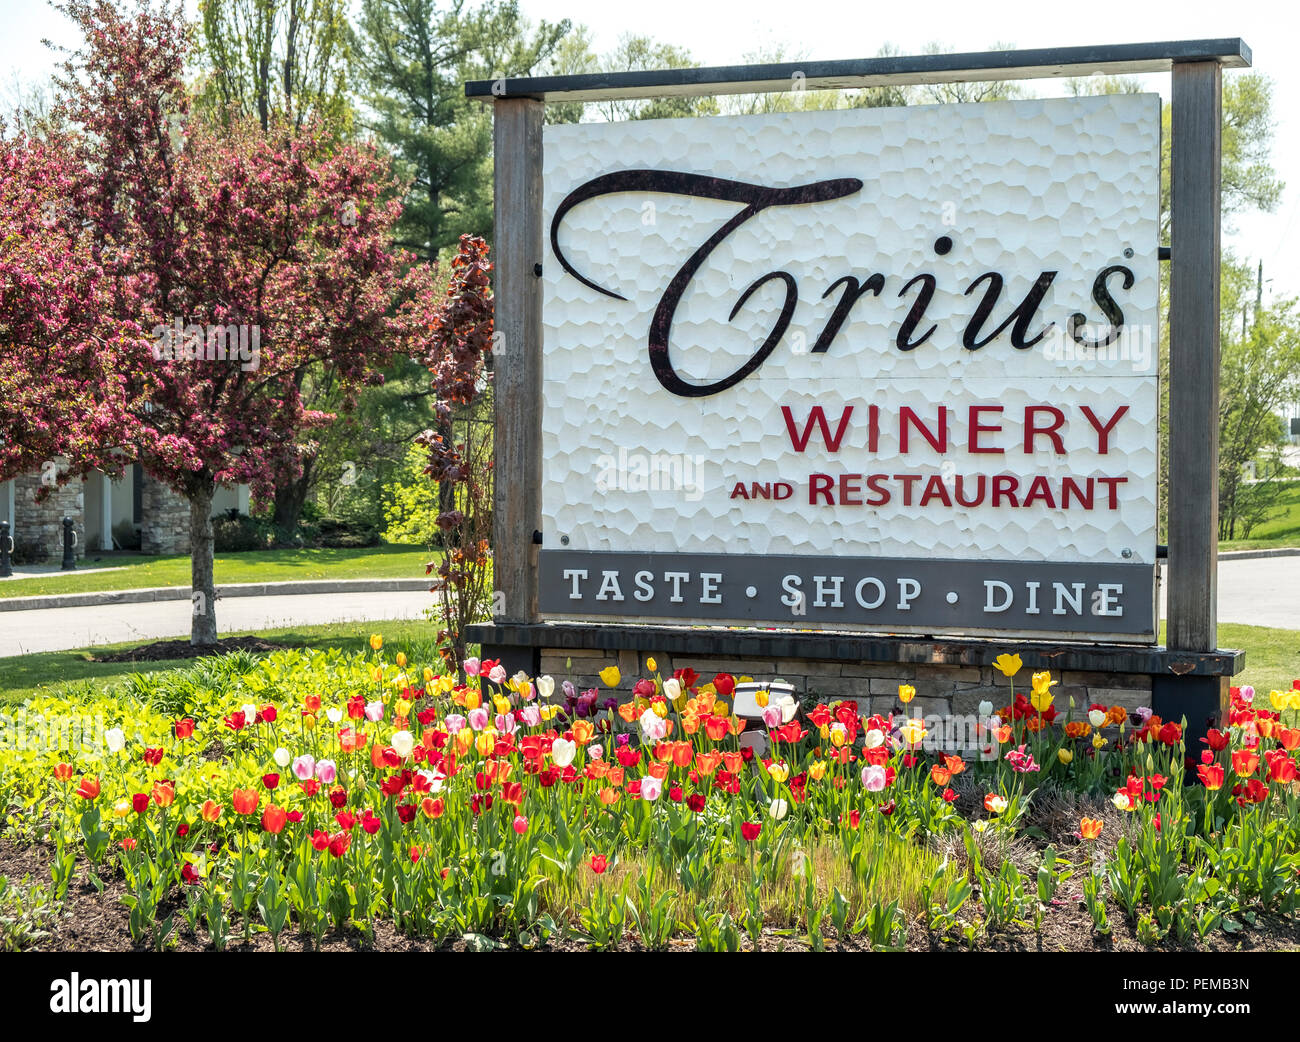 Trius winery and restaurant sign surrounded by tulips at the entrance to this popular winery in Niagara on the Lake Ontario Canada. Stock Photo